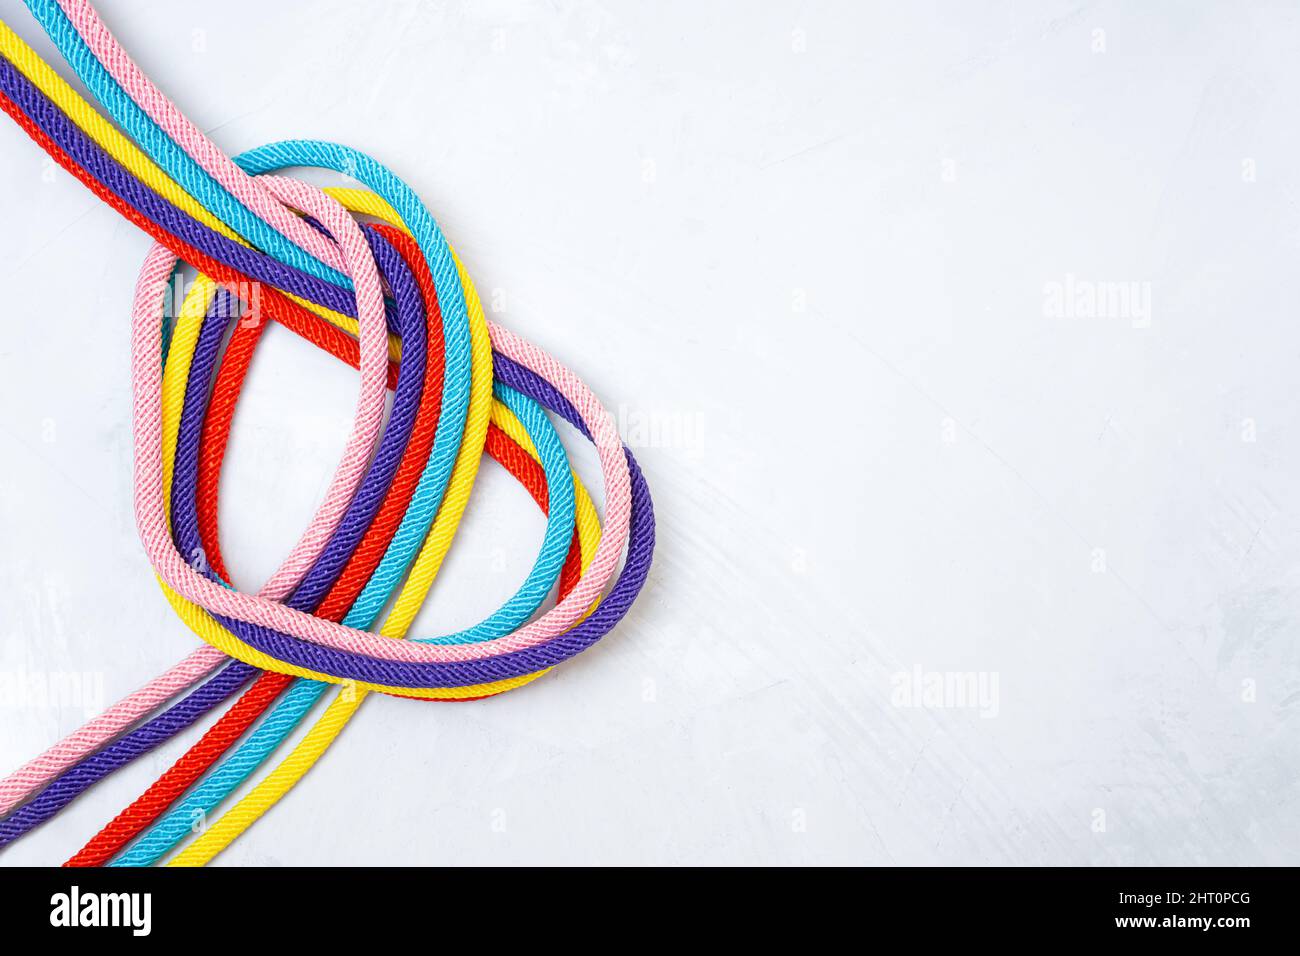 Heart shaped made of five multicolored cords twisted on a concrete background. Creative relationship concept. Stock Photo